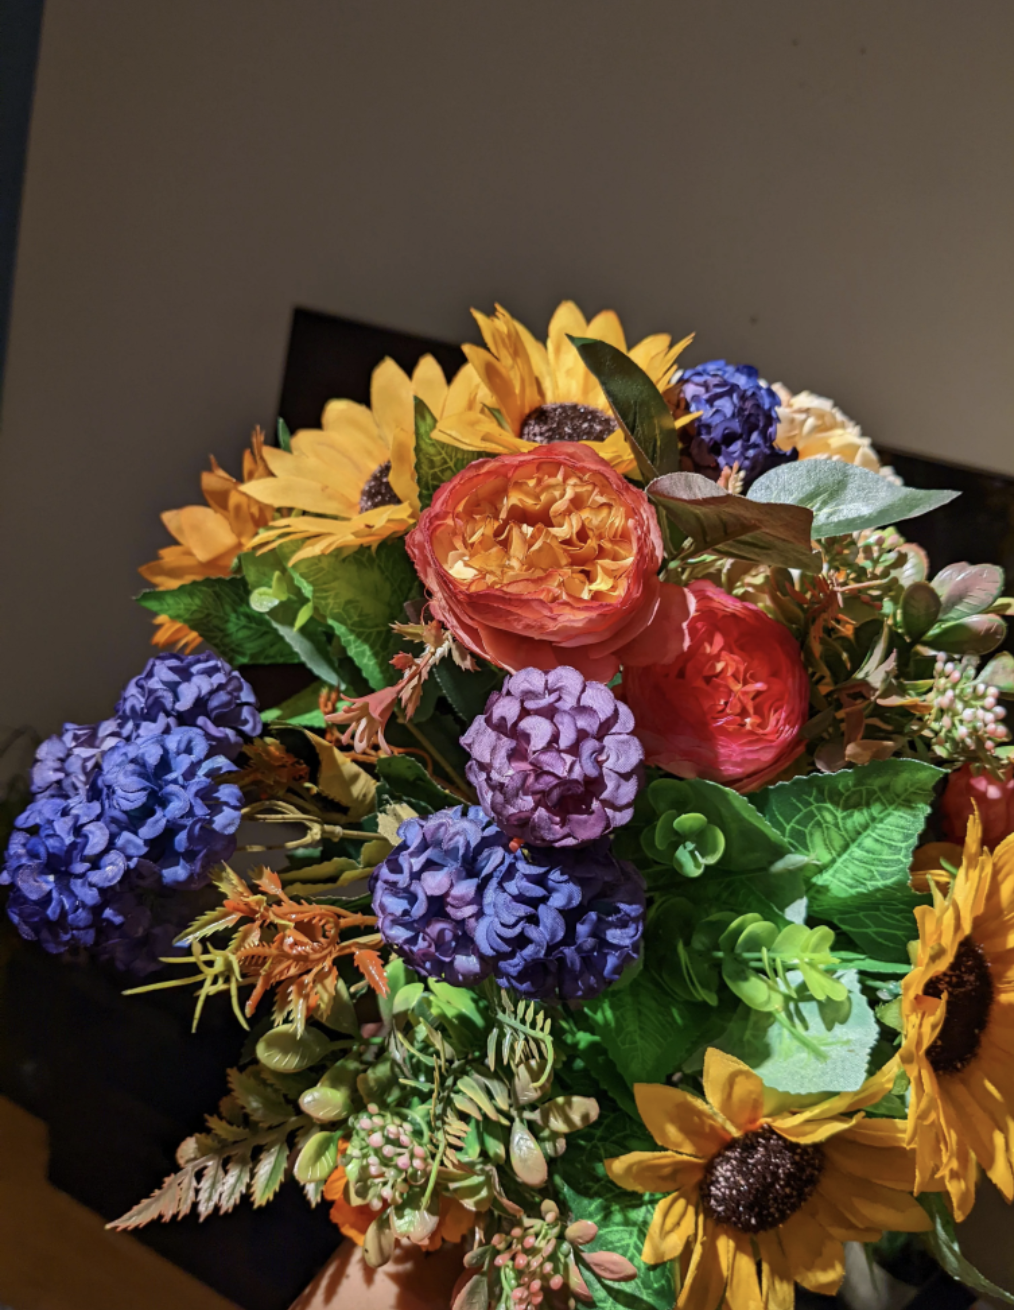 A bouquet of colorful fake flowers